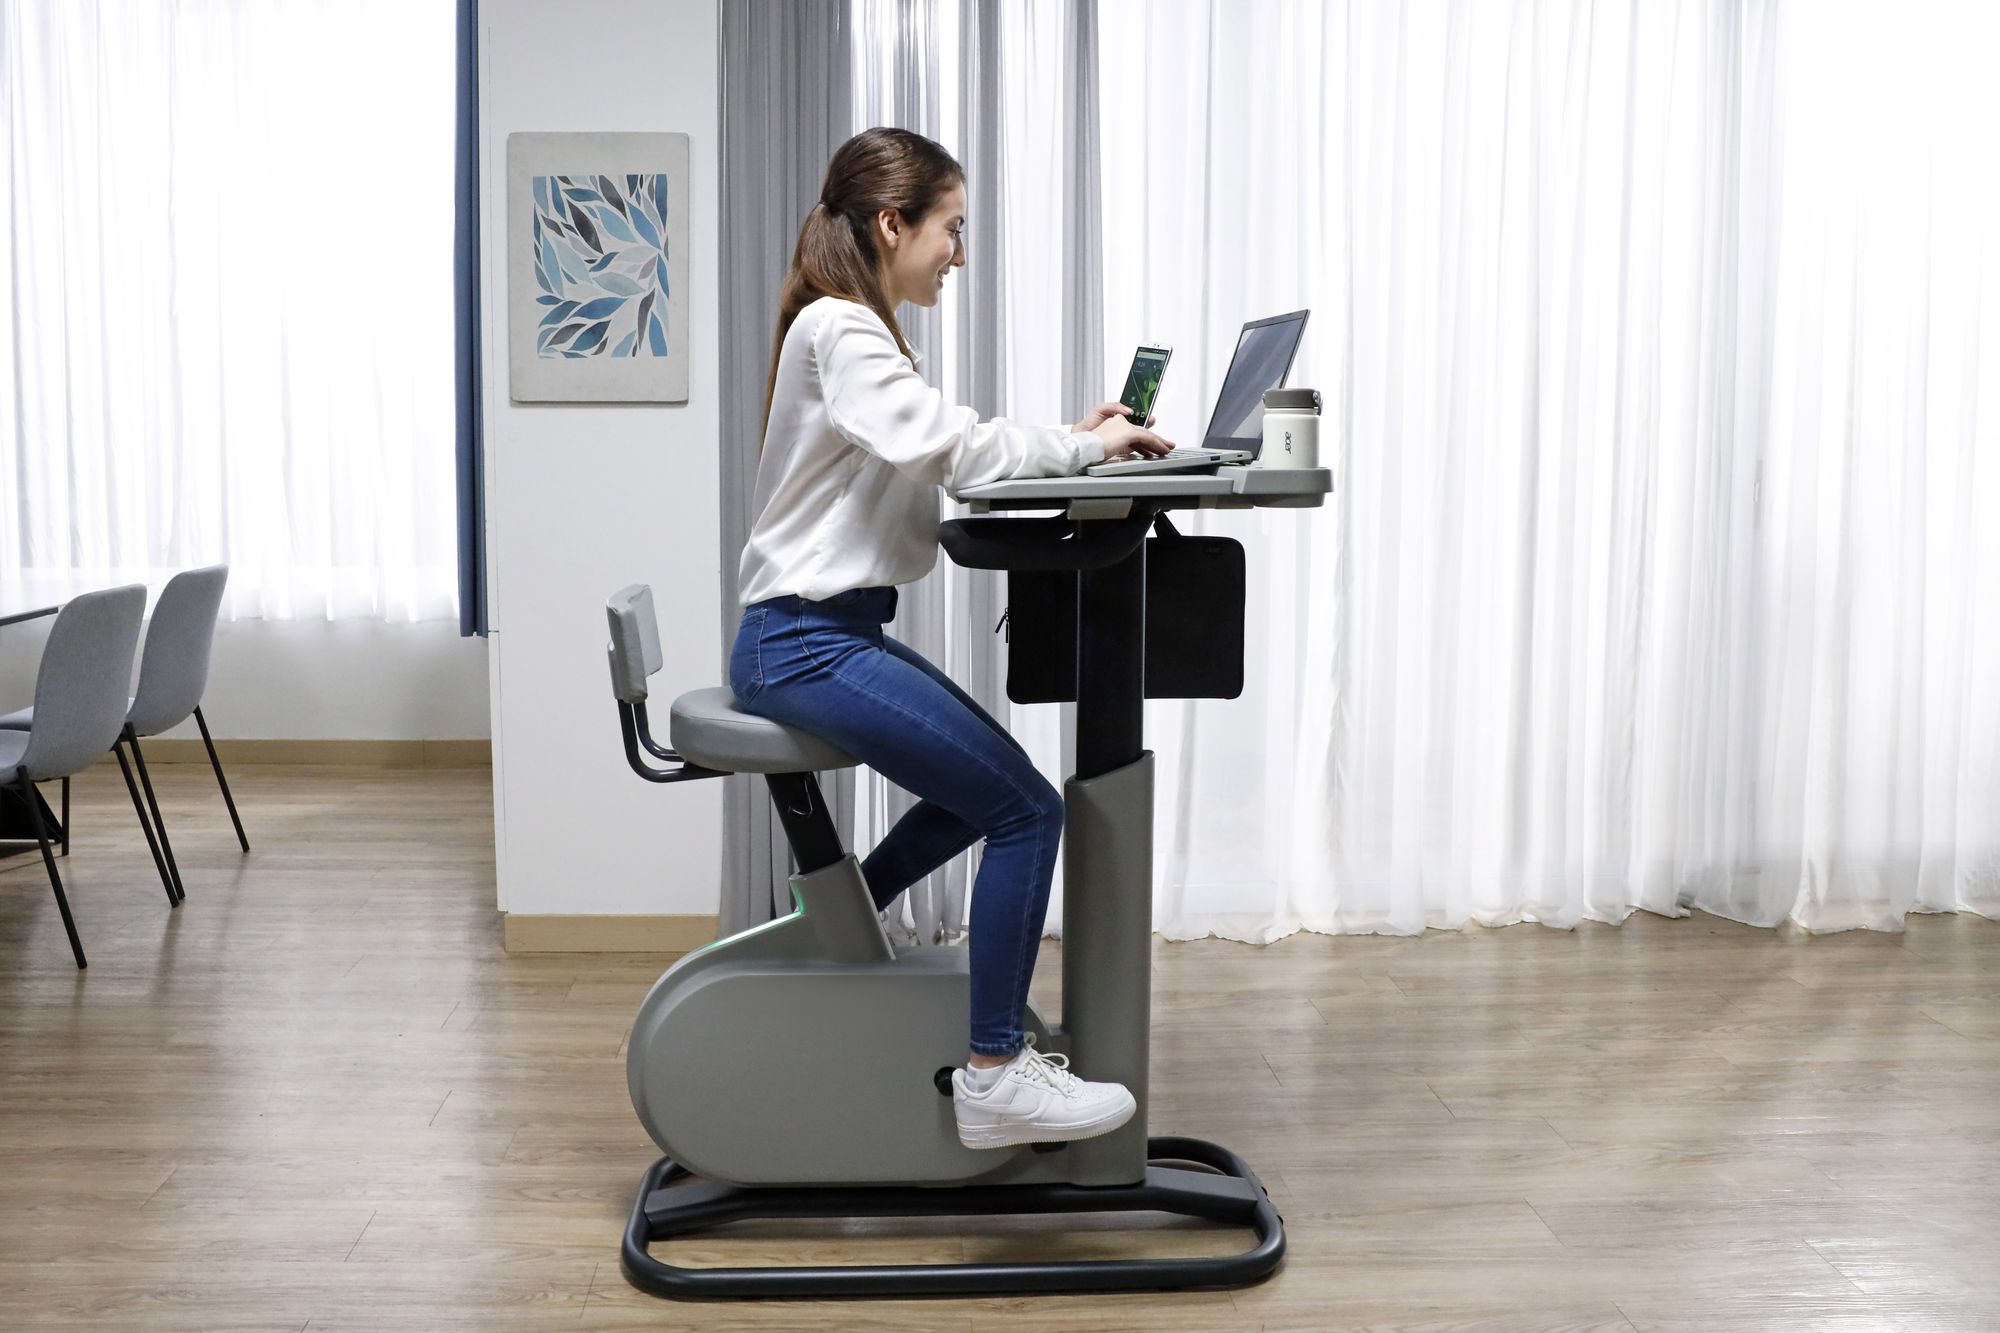 Acer introduced a $999 exercise bike that can charge gadgets by pedaling